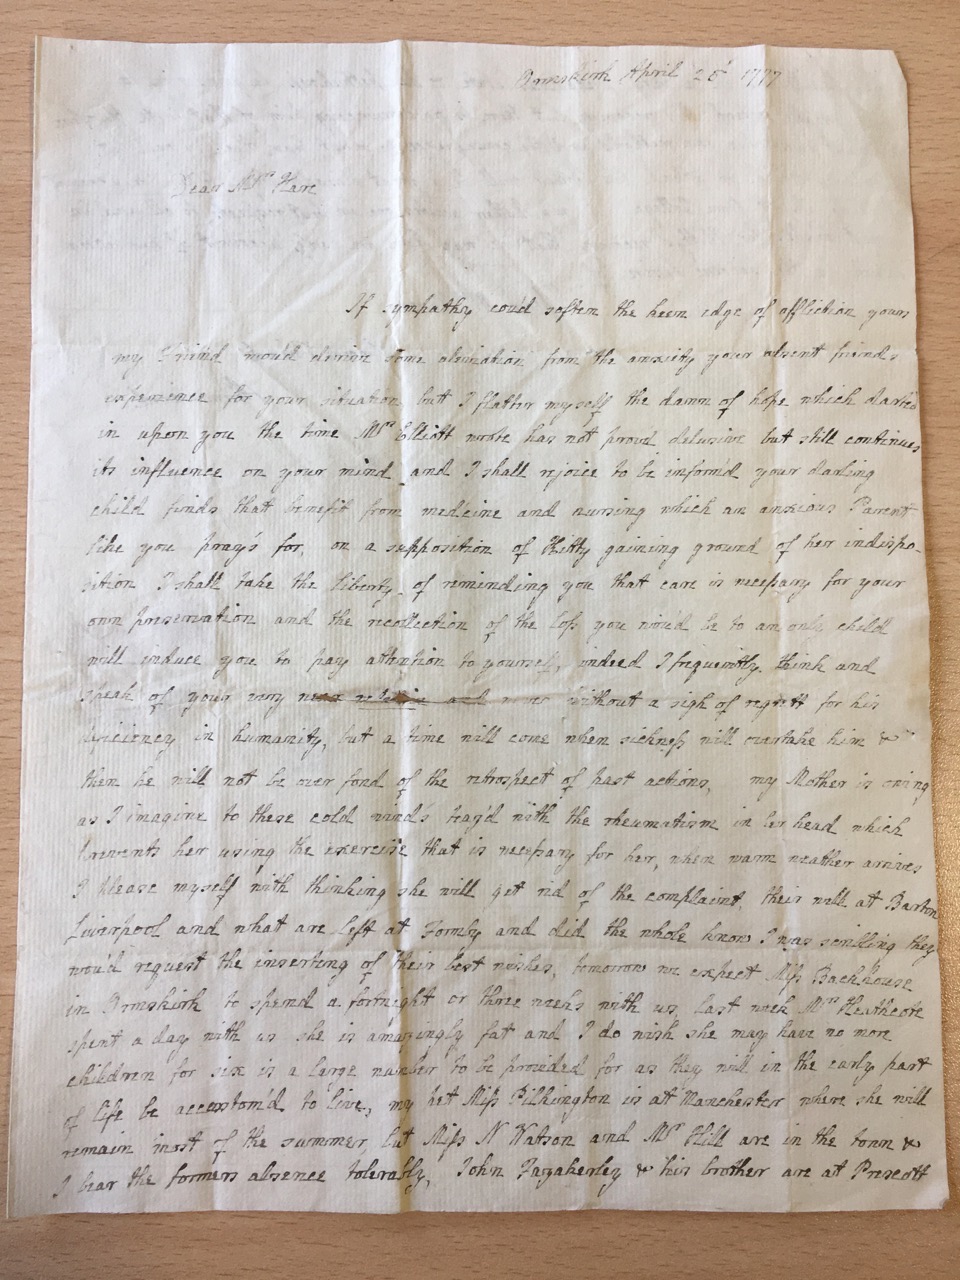 Image #1 of letter: J[enny] Brownsword to Ann Hare 25 April 1777